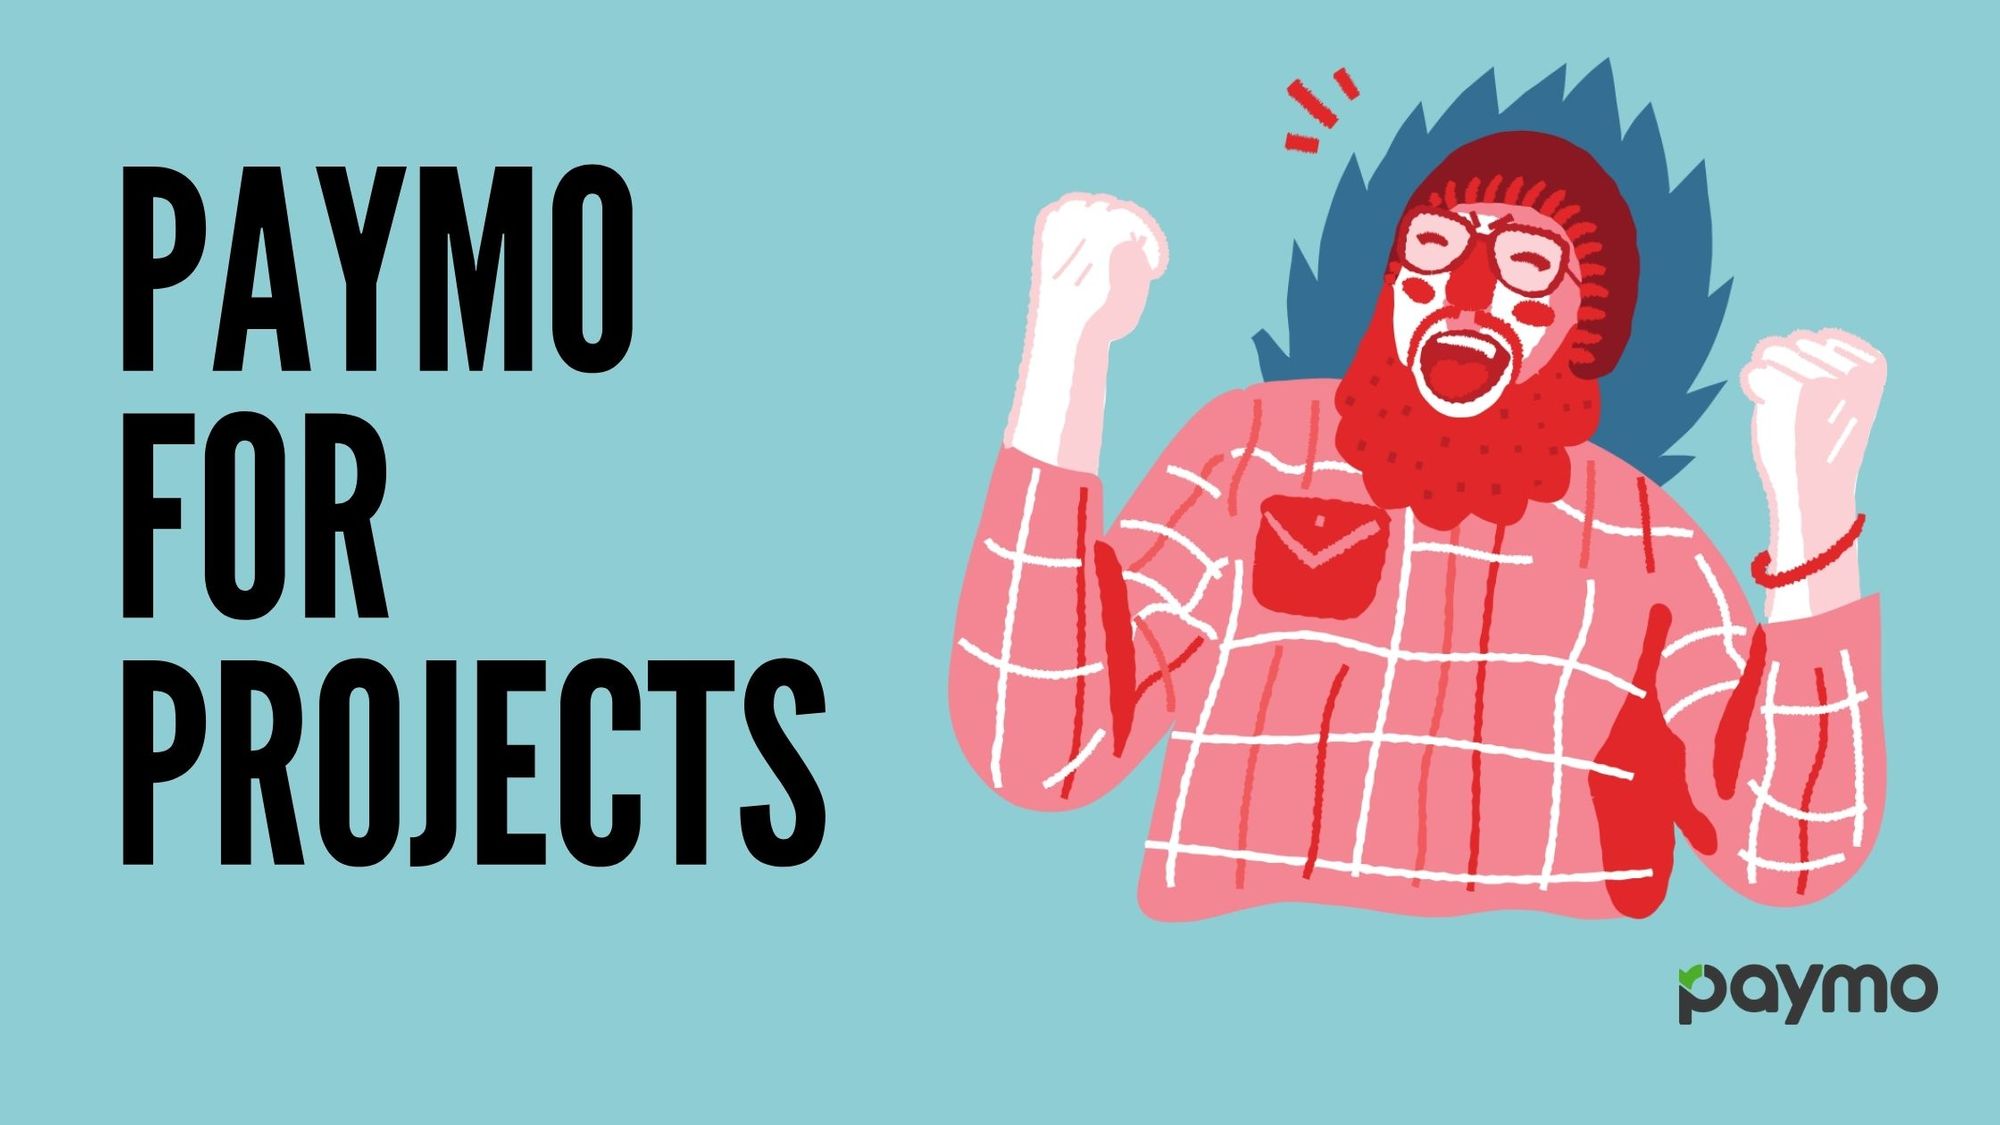 Paymo for Project Management - Everything You Need to Know